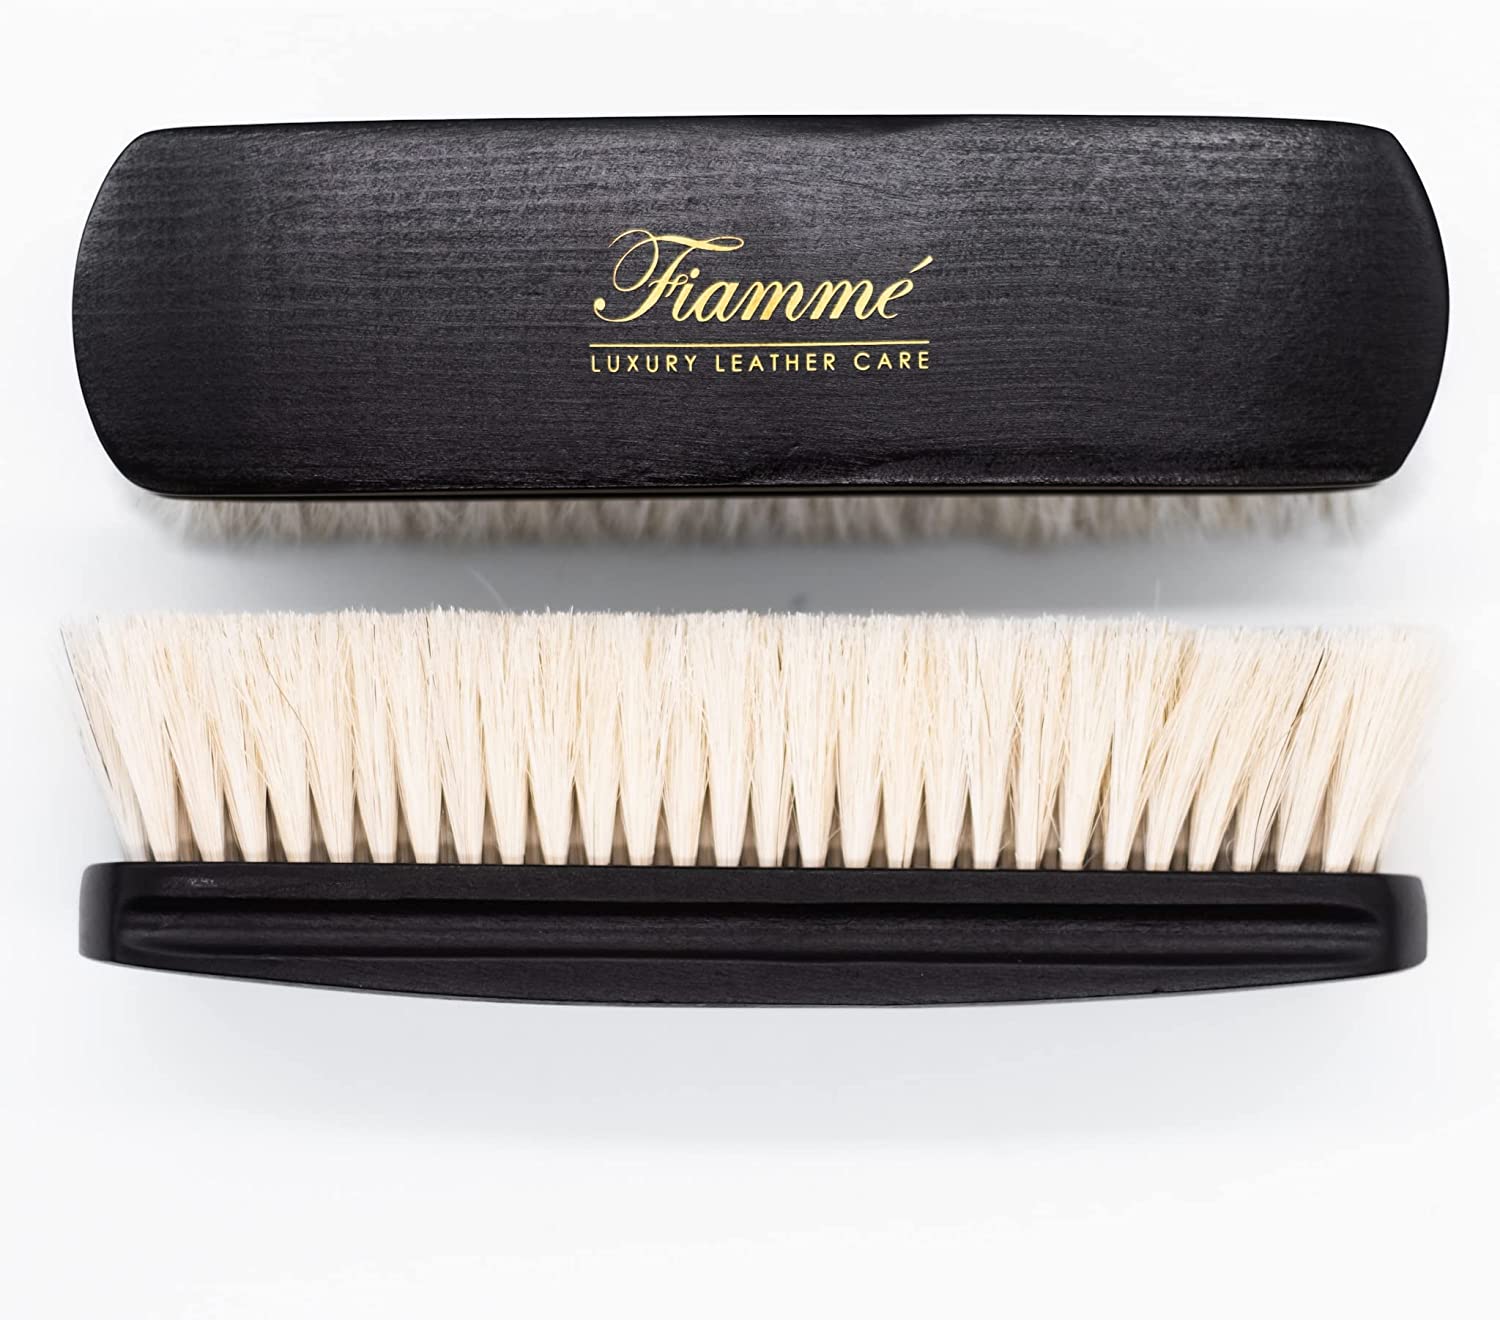 Shoe Cleaning Brush- Sneaker Soft Bristle Brush for Canvas, Leather, Mesh,  Cloth & More- 6.7- Fiamme Luxury Care - The Vac Shop